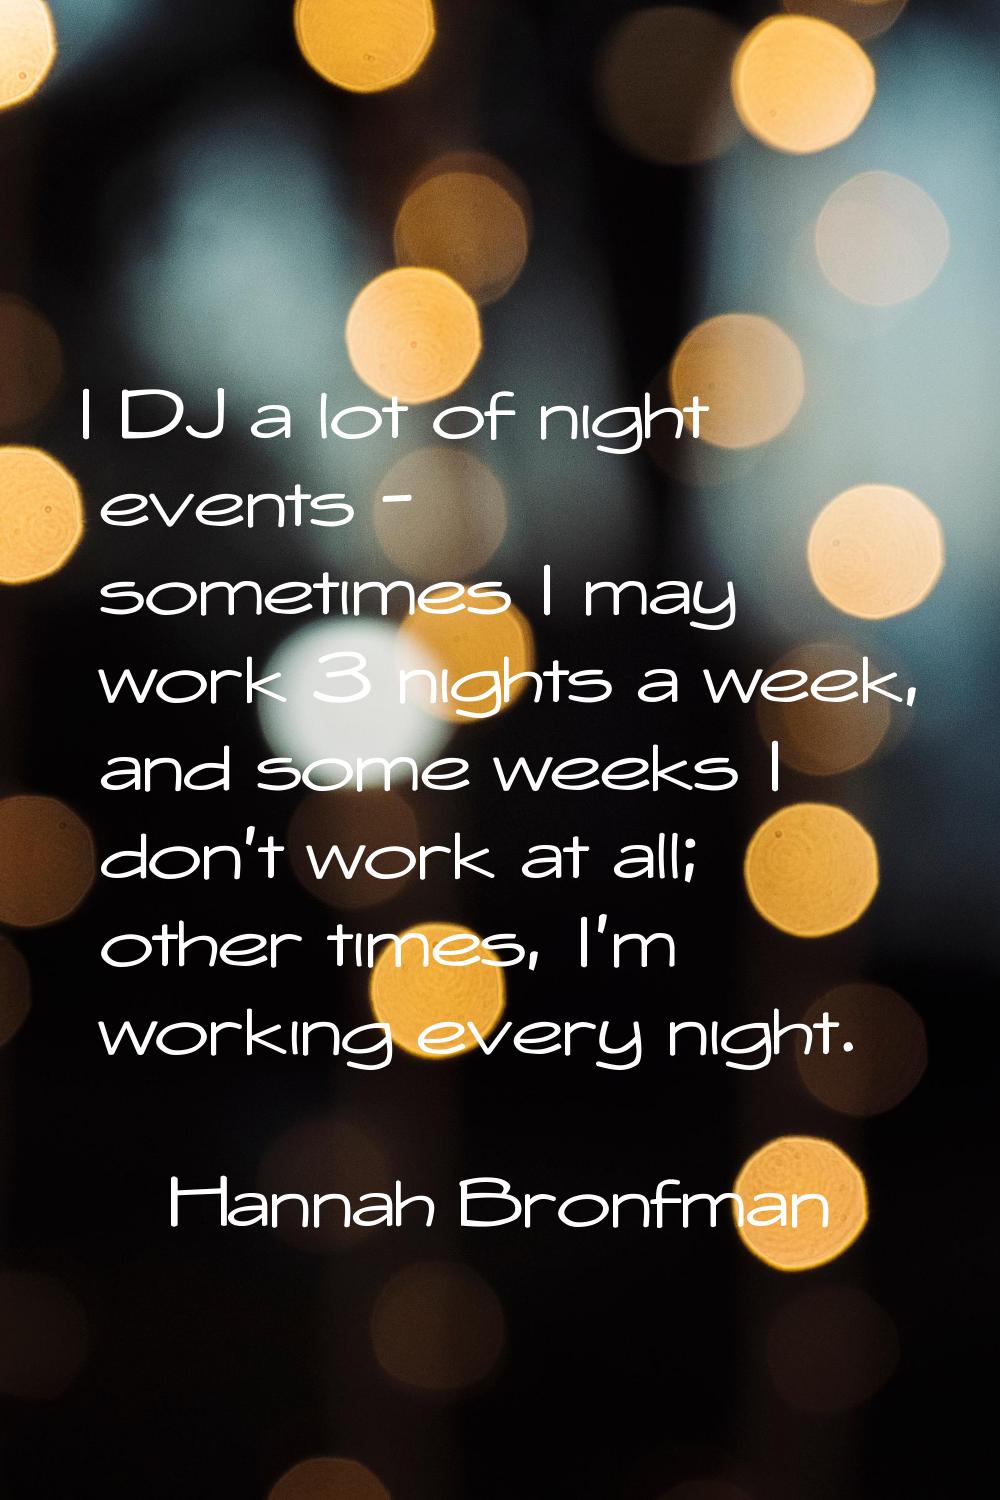 I DJ a lot of night events - sometimes I may work 3 nights a week, and some weeks I don't work at a